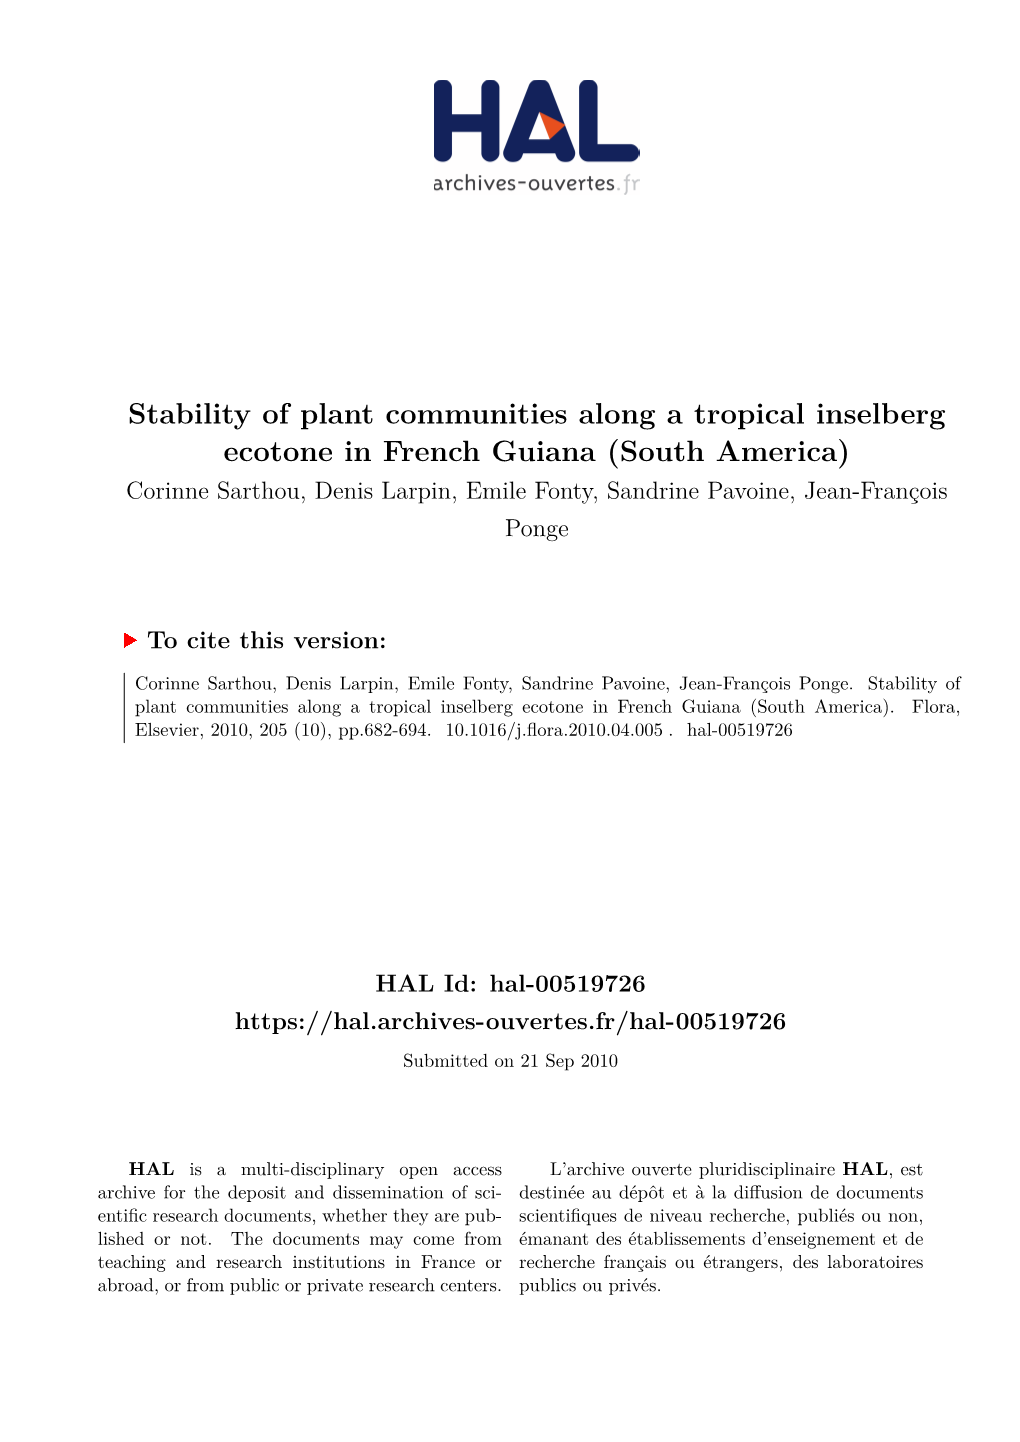 Stability of Plant Communities Along a Tropical Inselberg Ecotone in French Guiana